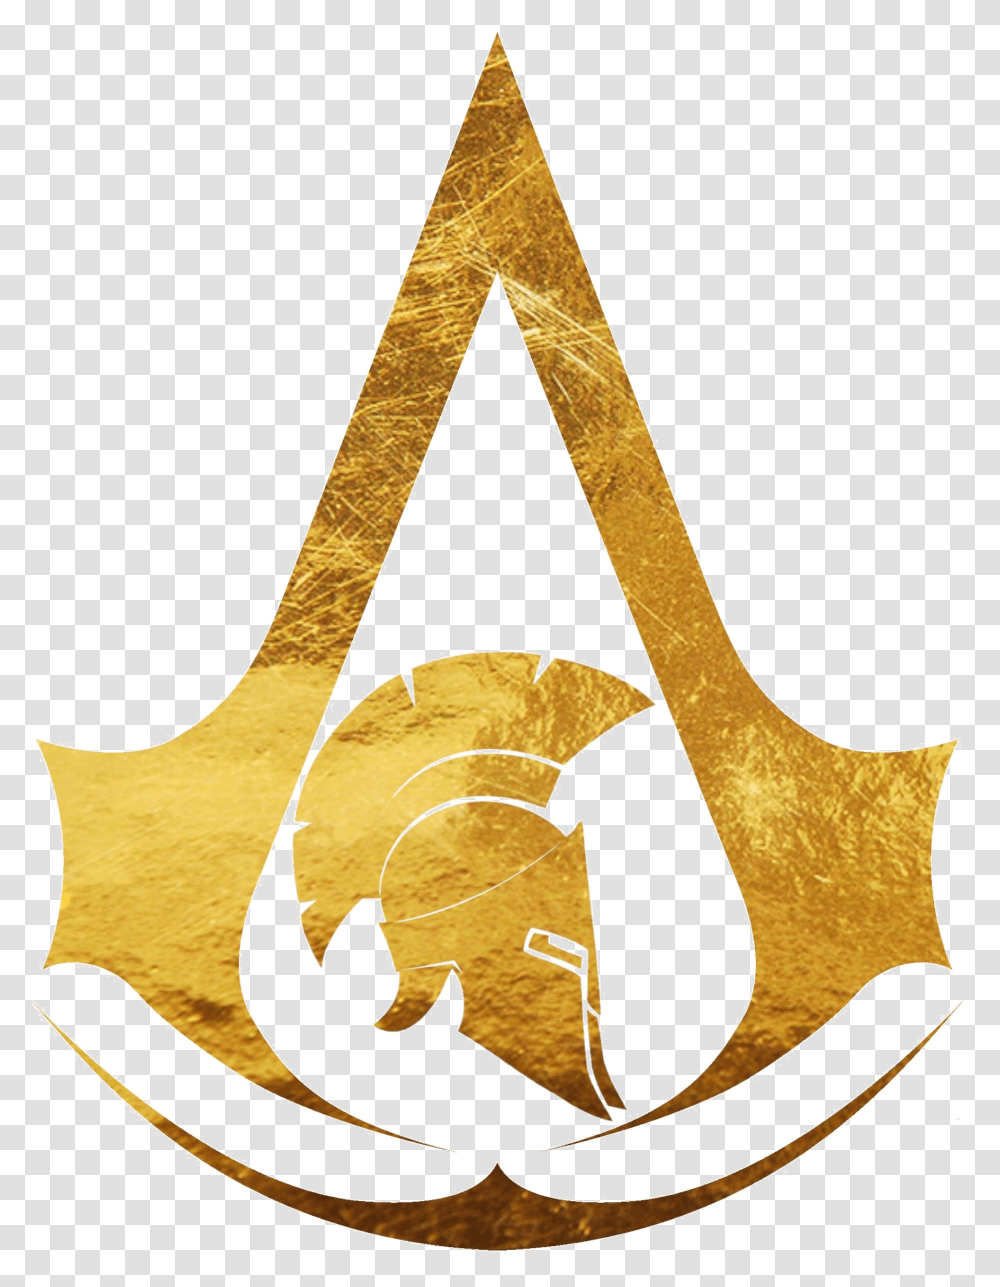 Assassins Creed Symbol Assassin's Creed Odyssey Symbole, Triangle, Snake, Reptile, Animal Transparent Png